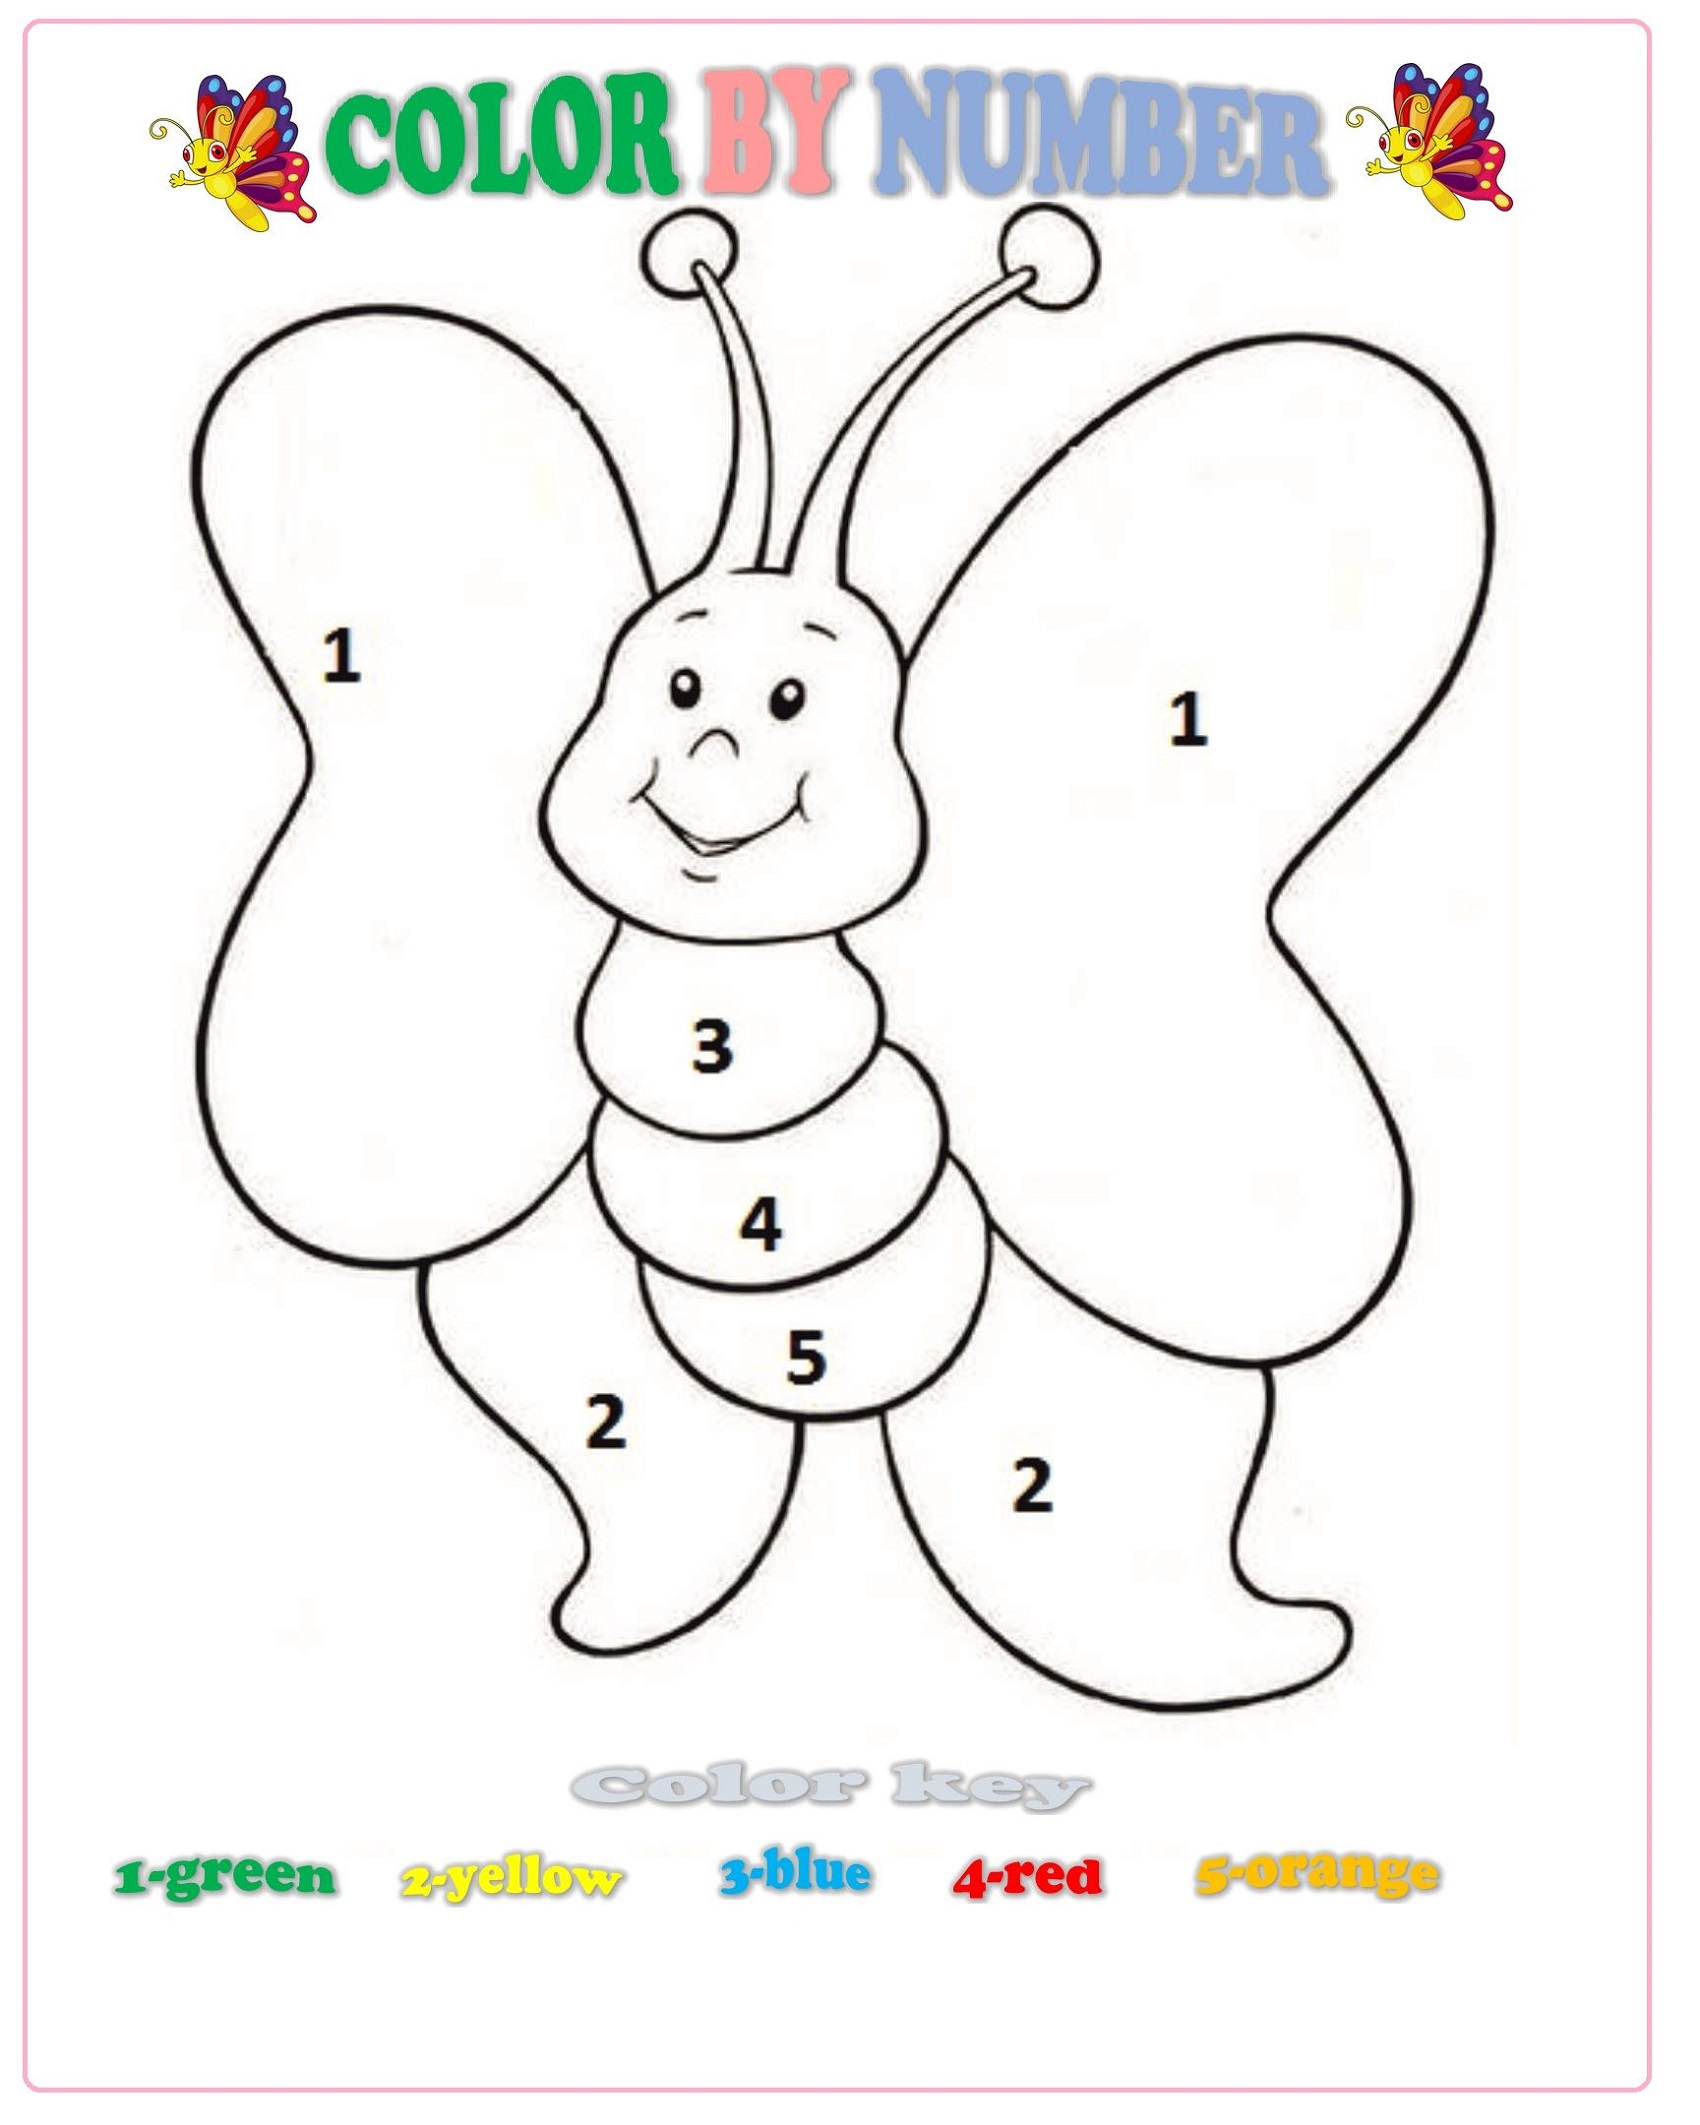 fun-color-by-numbers-for-kids-101-coloring-free-printable-color-by